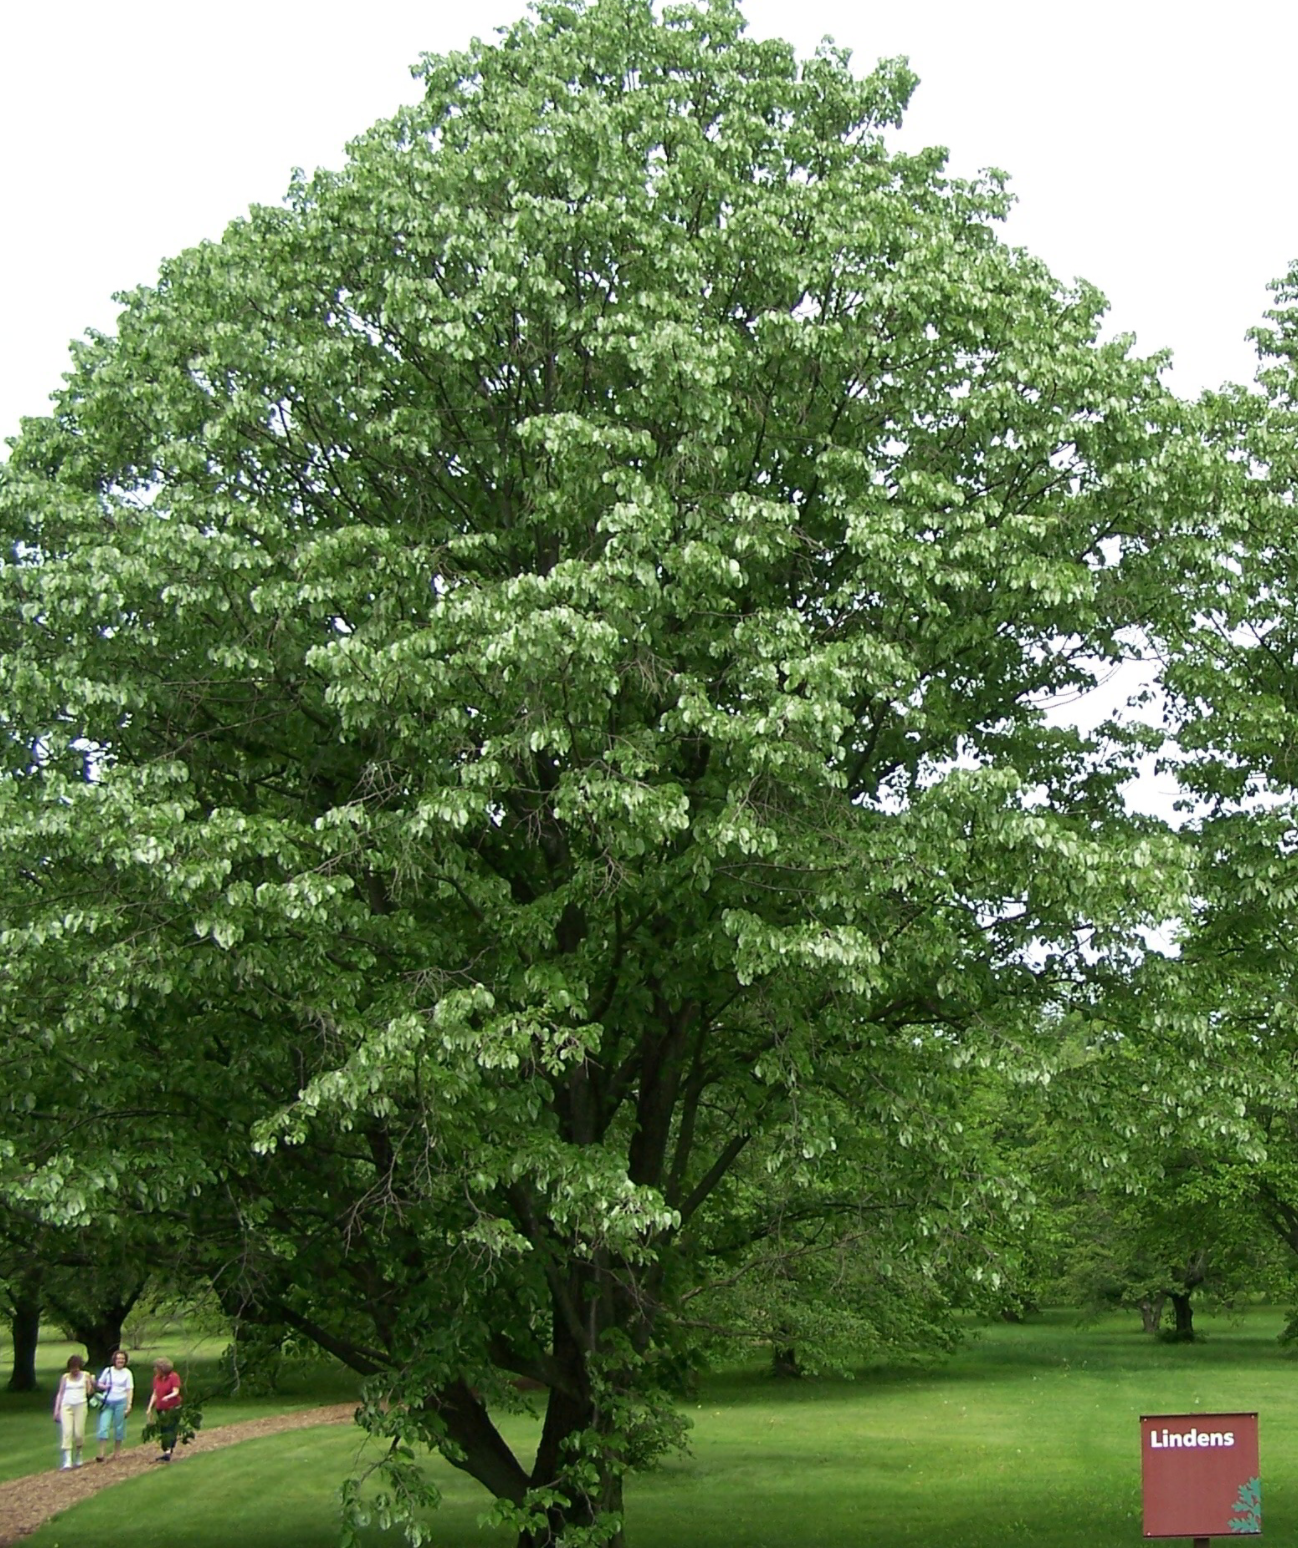 Know Your Trees: Linden Trees | The Georgetown Metropolitan